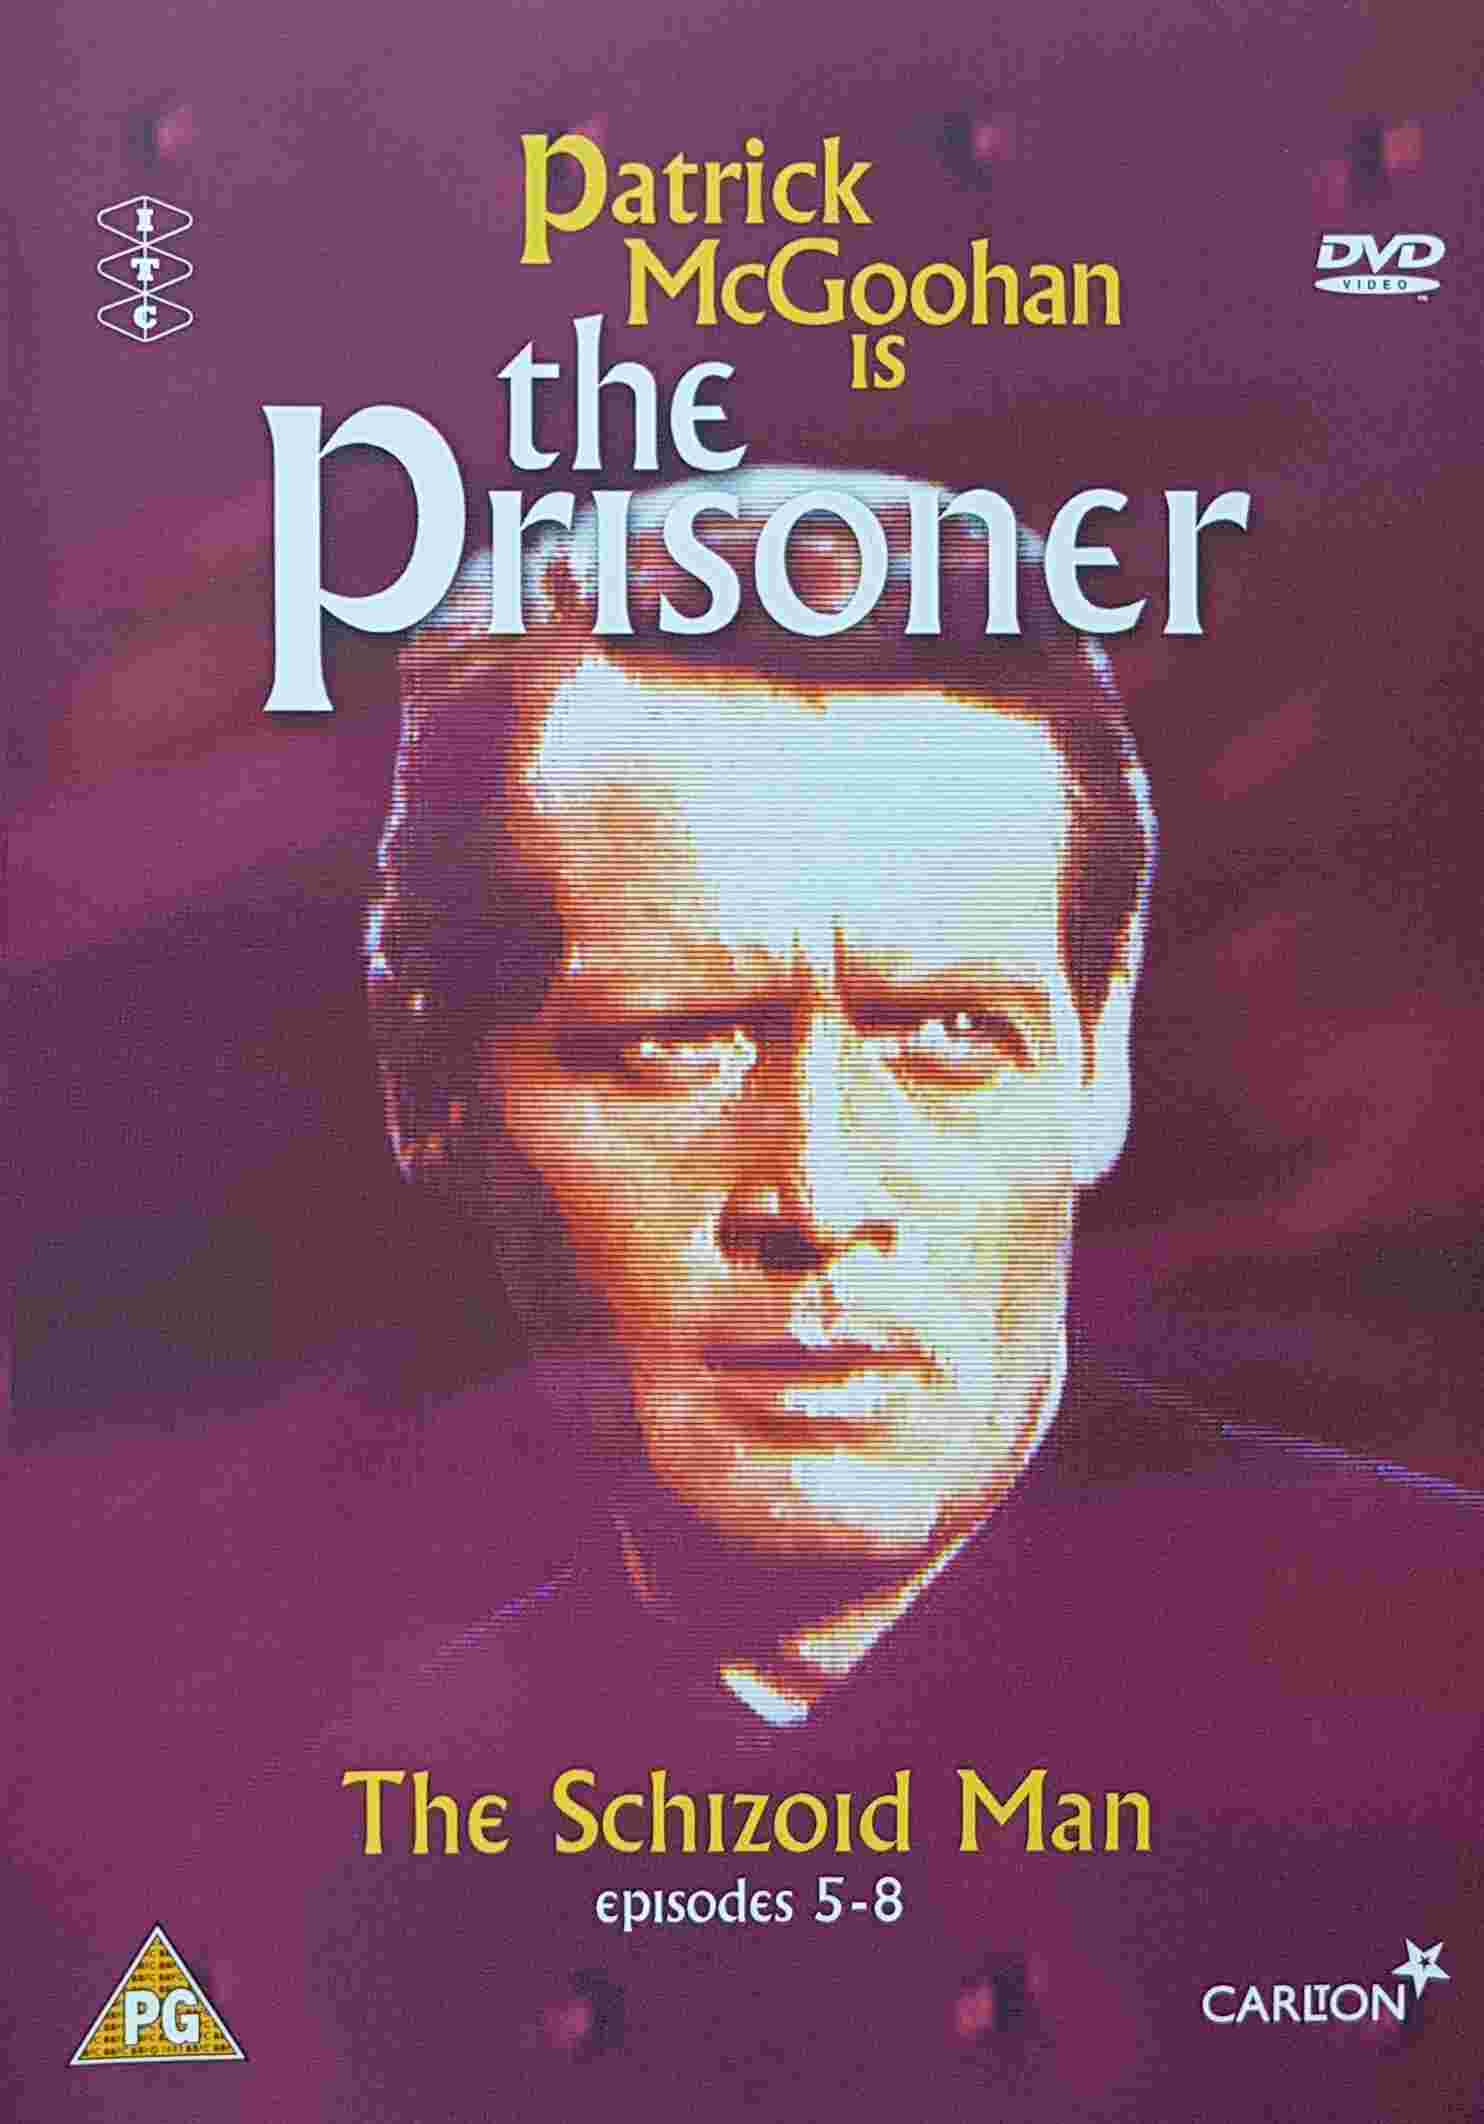 Picture of 37115 00953 The prisoner - Episodes 5 - 8 by artist Various from ITV, Channel 4 and Channel 5 dvds library